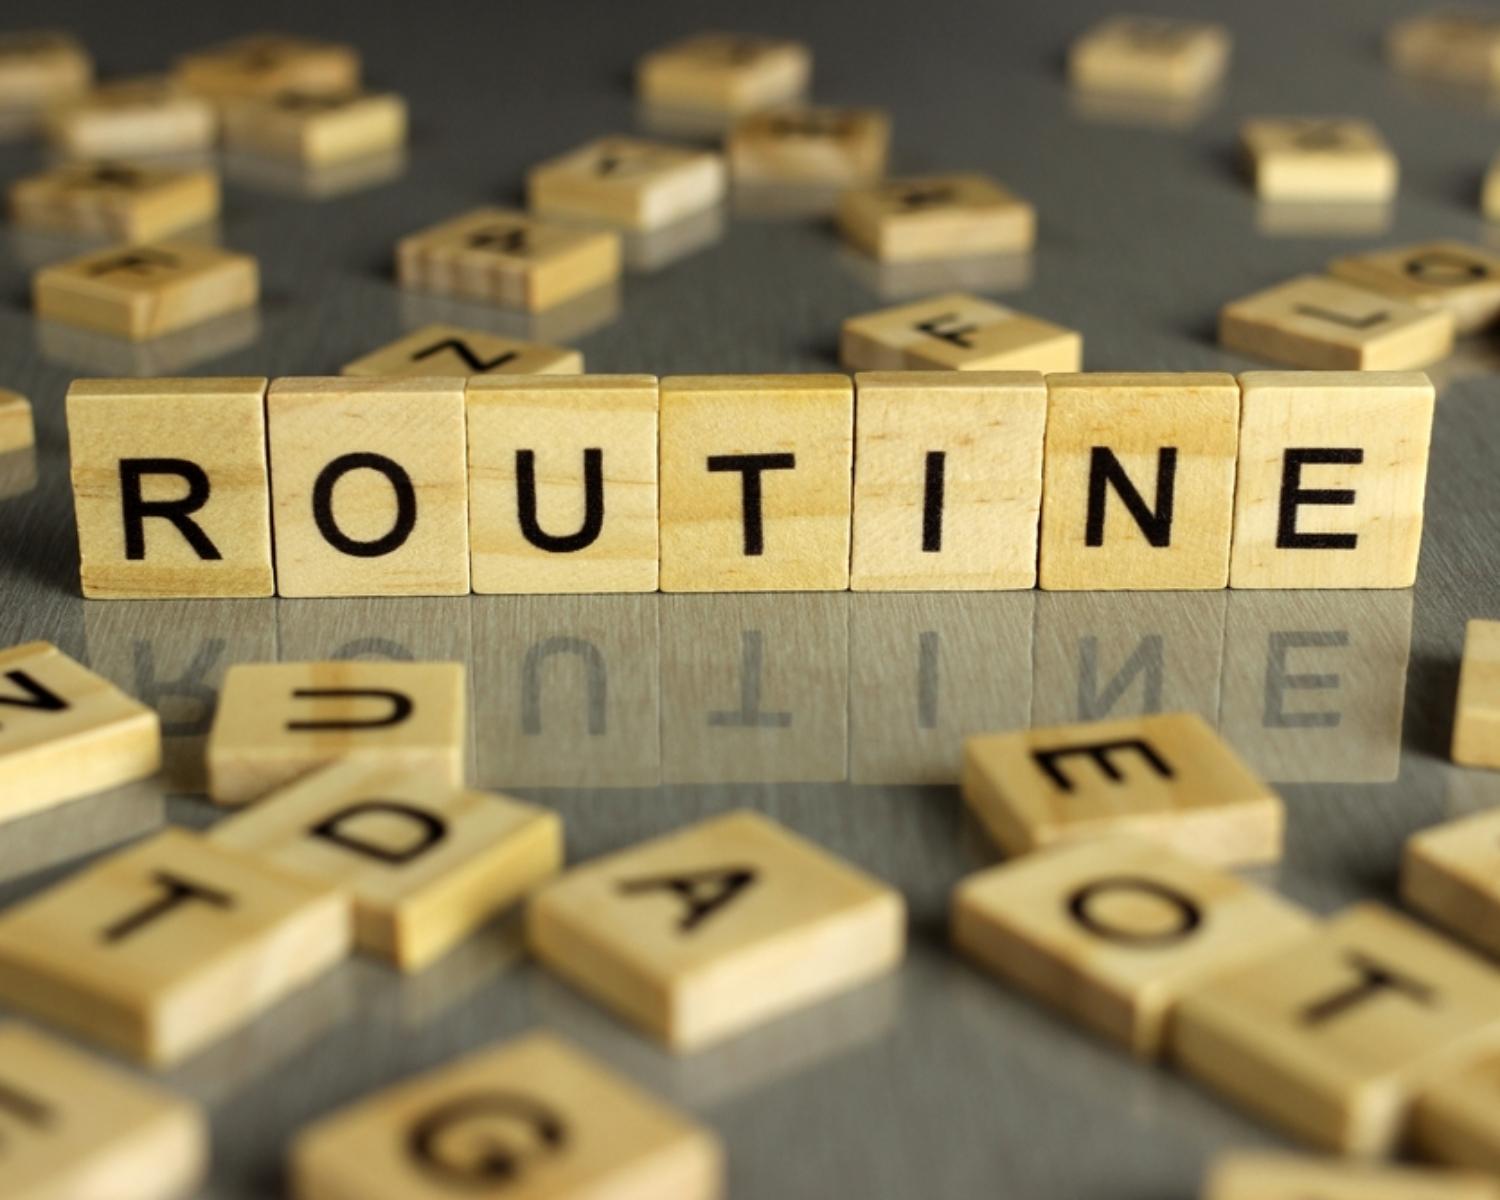 4. Start a simple daily routine that you CAN actually do